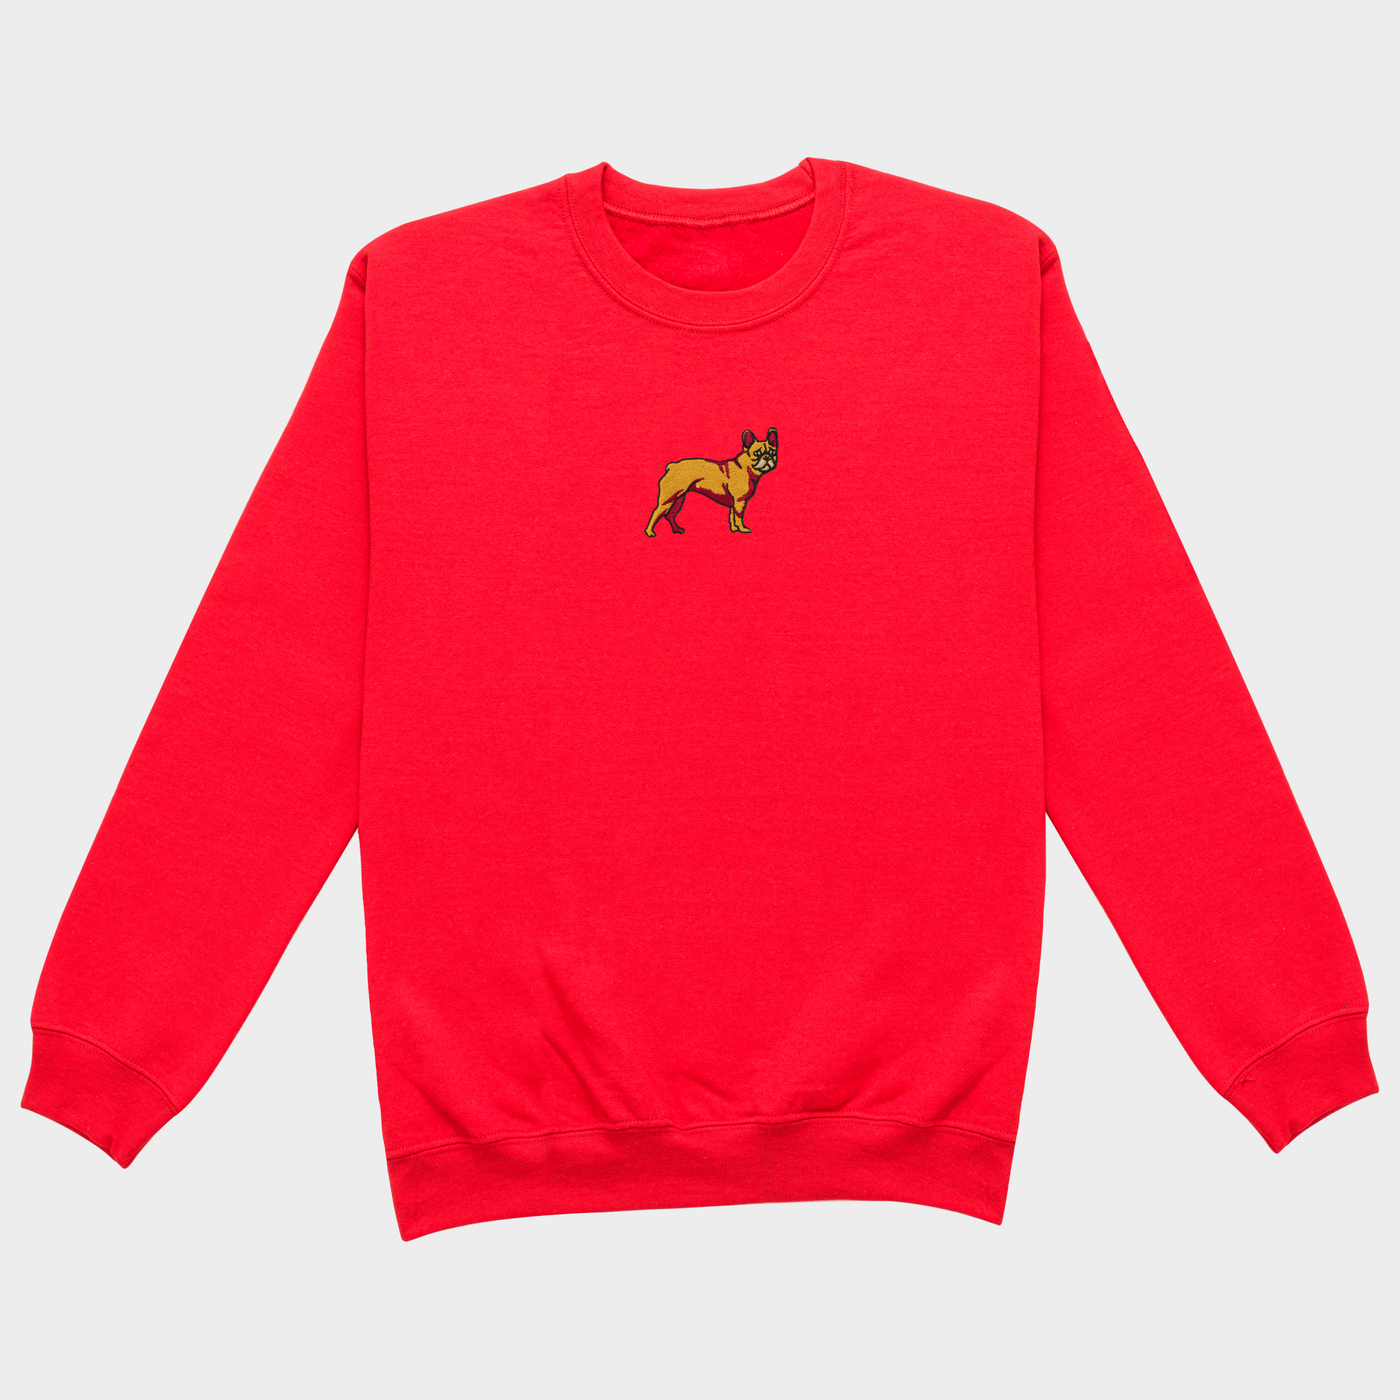 Bobby's Planet Women's Embroidered French Bulldog Sweatshirt from Paws Dog Cat Animals Collection in Red Color#color_red